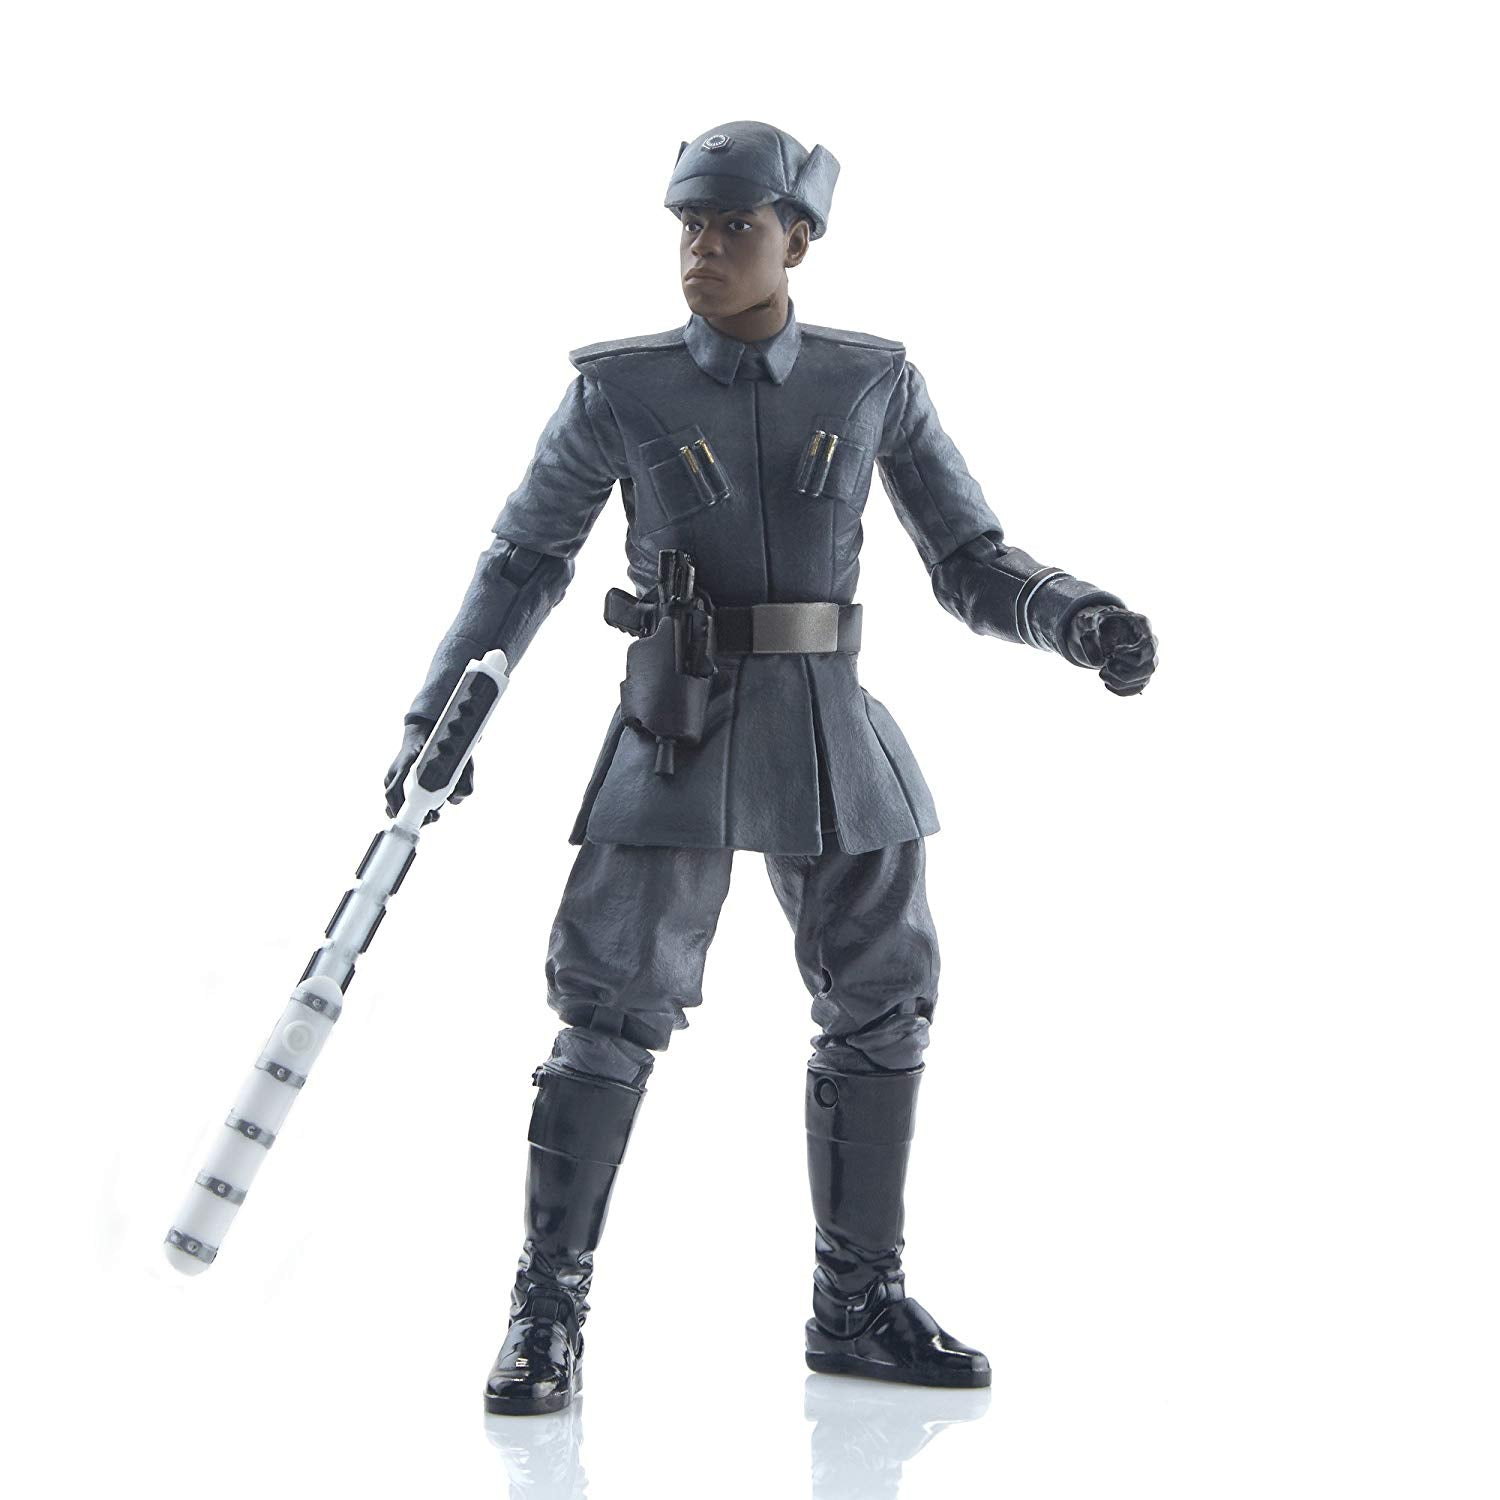 Hasbro Star Wars Black Series Force Awakens #51 Finn First Order Disguise Episode 8 6 Inch Action Figure